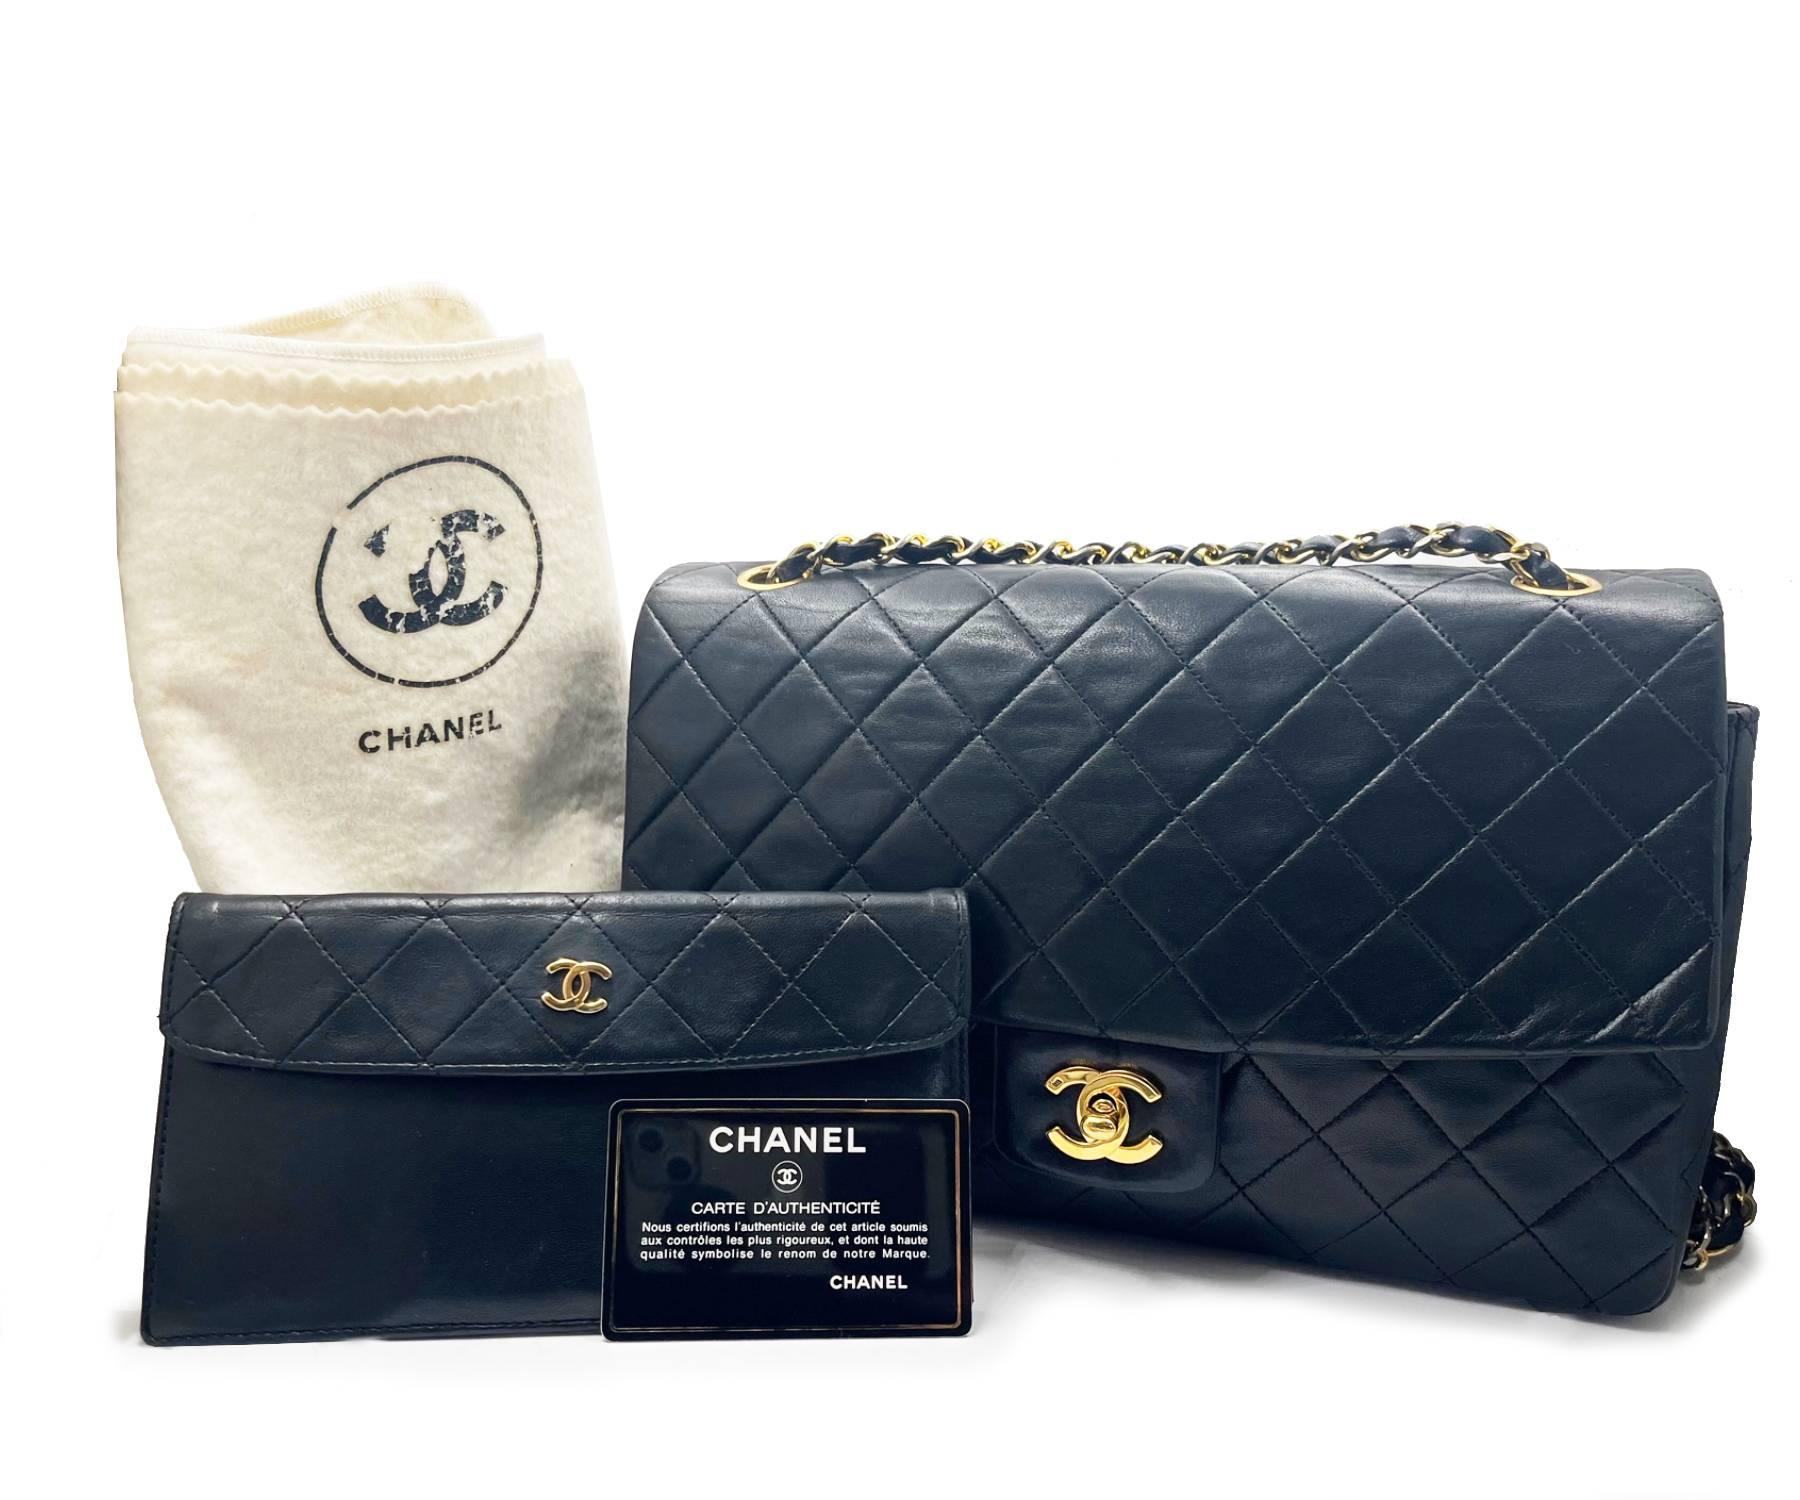 Chanel Vintage Beige Tassel Camera Small Cross Body Bag

* 270XXXX
* Made in France
* Comes with the control number card and dustbag

-It is approximately 7.5″ x 5″ x 3″.
-The drop of the chain is 20″.
-Corners are good.
-The leather of the zipper